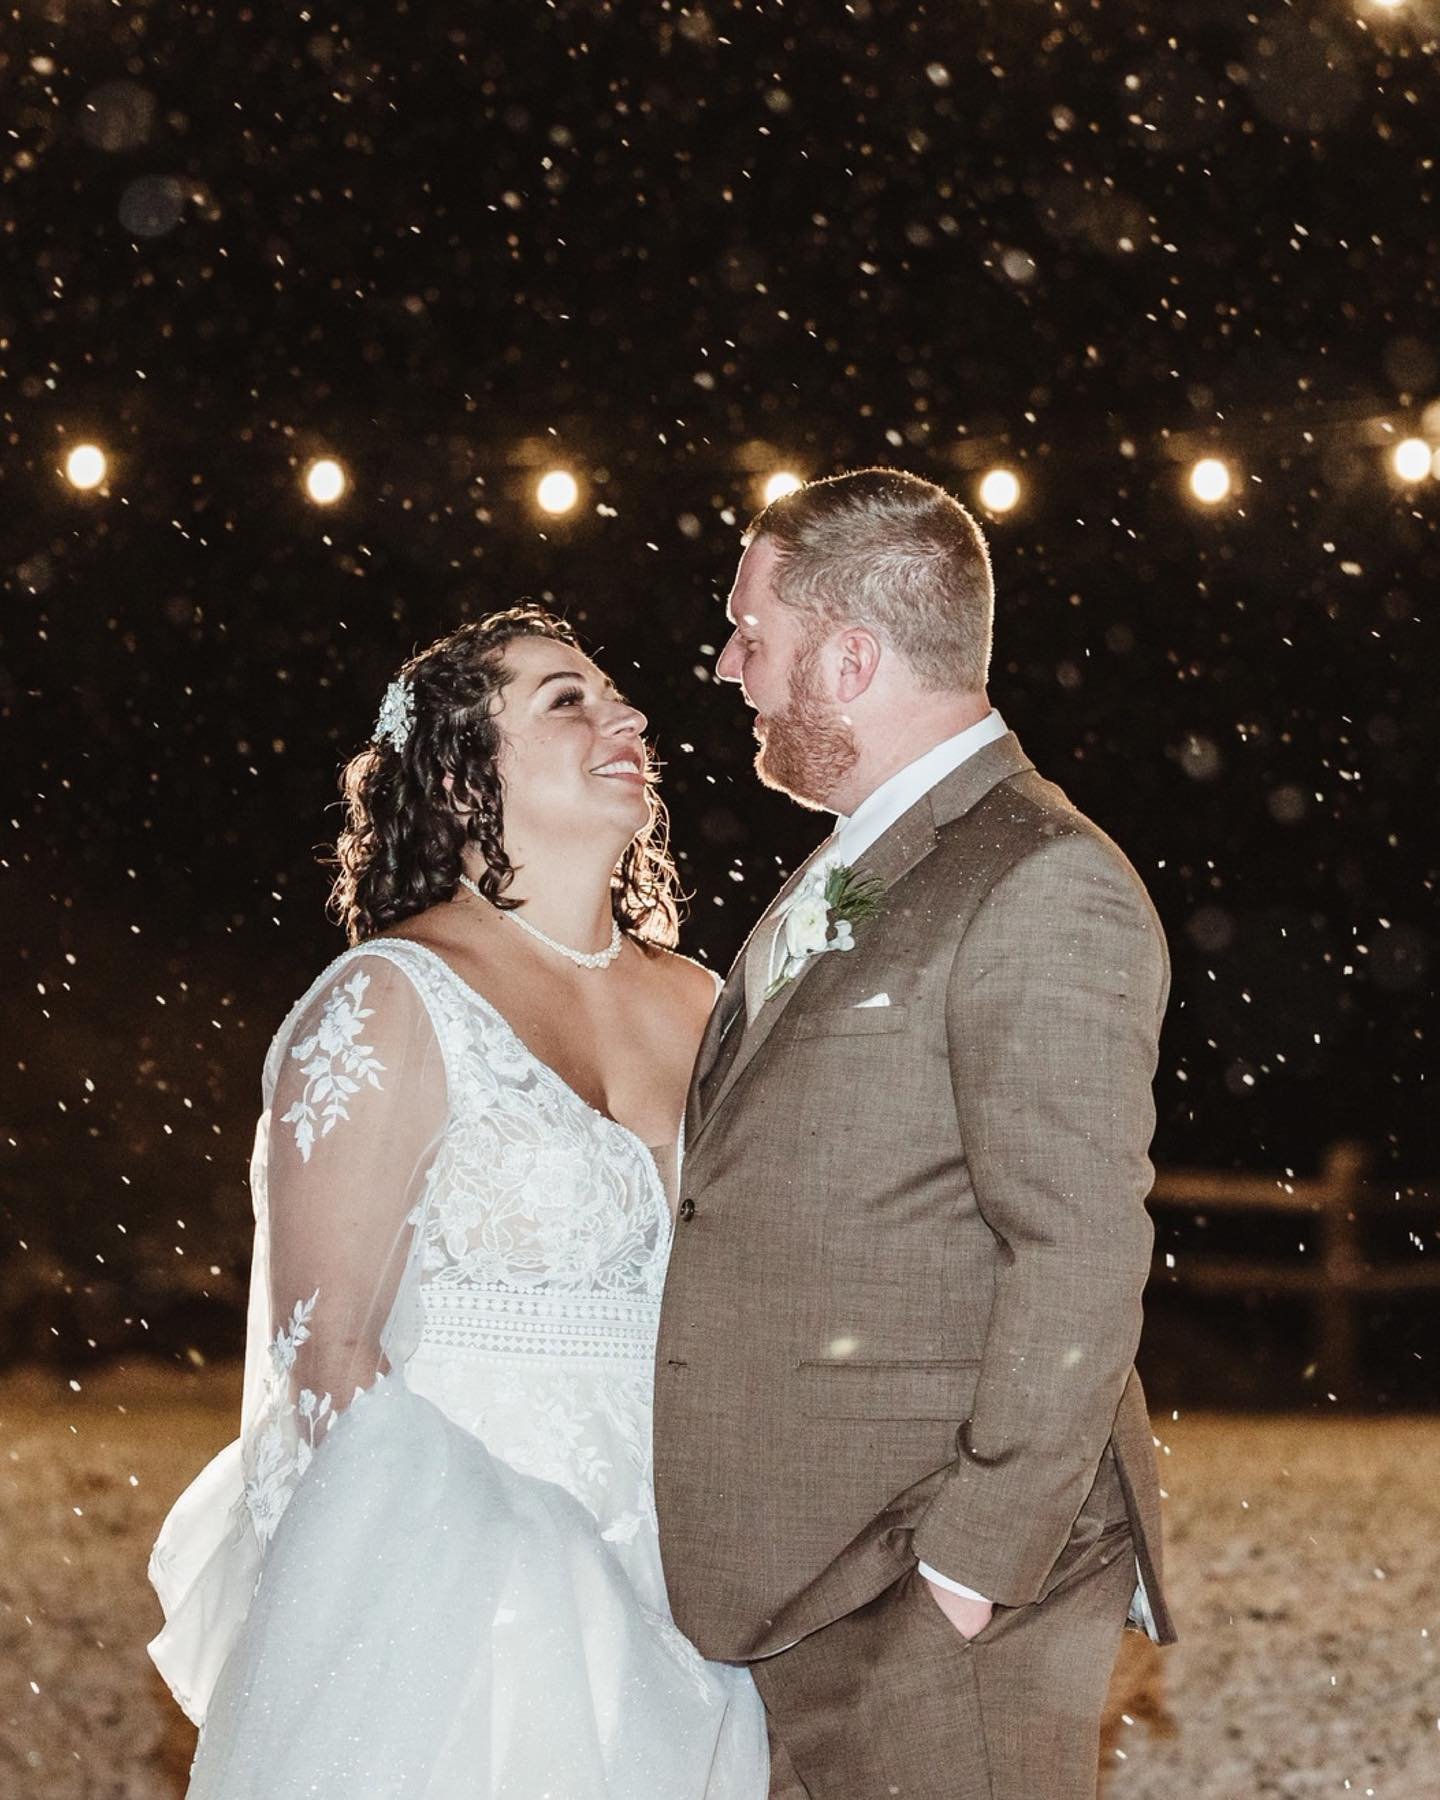 Coming out of my winter slumber for my first post in 2024 (whoops!) oh wait it still looks like winter outside.
 
On that note, enjoy this snowy wedding from December! ❄️😍
 
 
 
.
.
.
#winterwedding #lakegenevawisconsin #lakegenevawedding #midwestwe